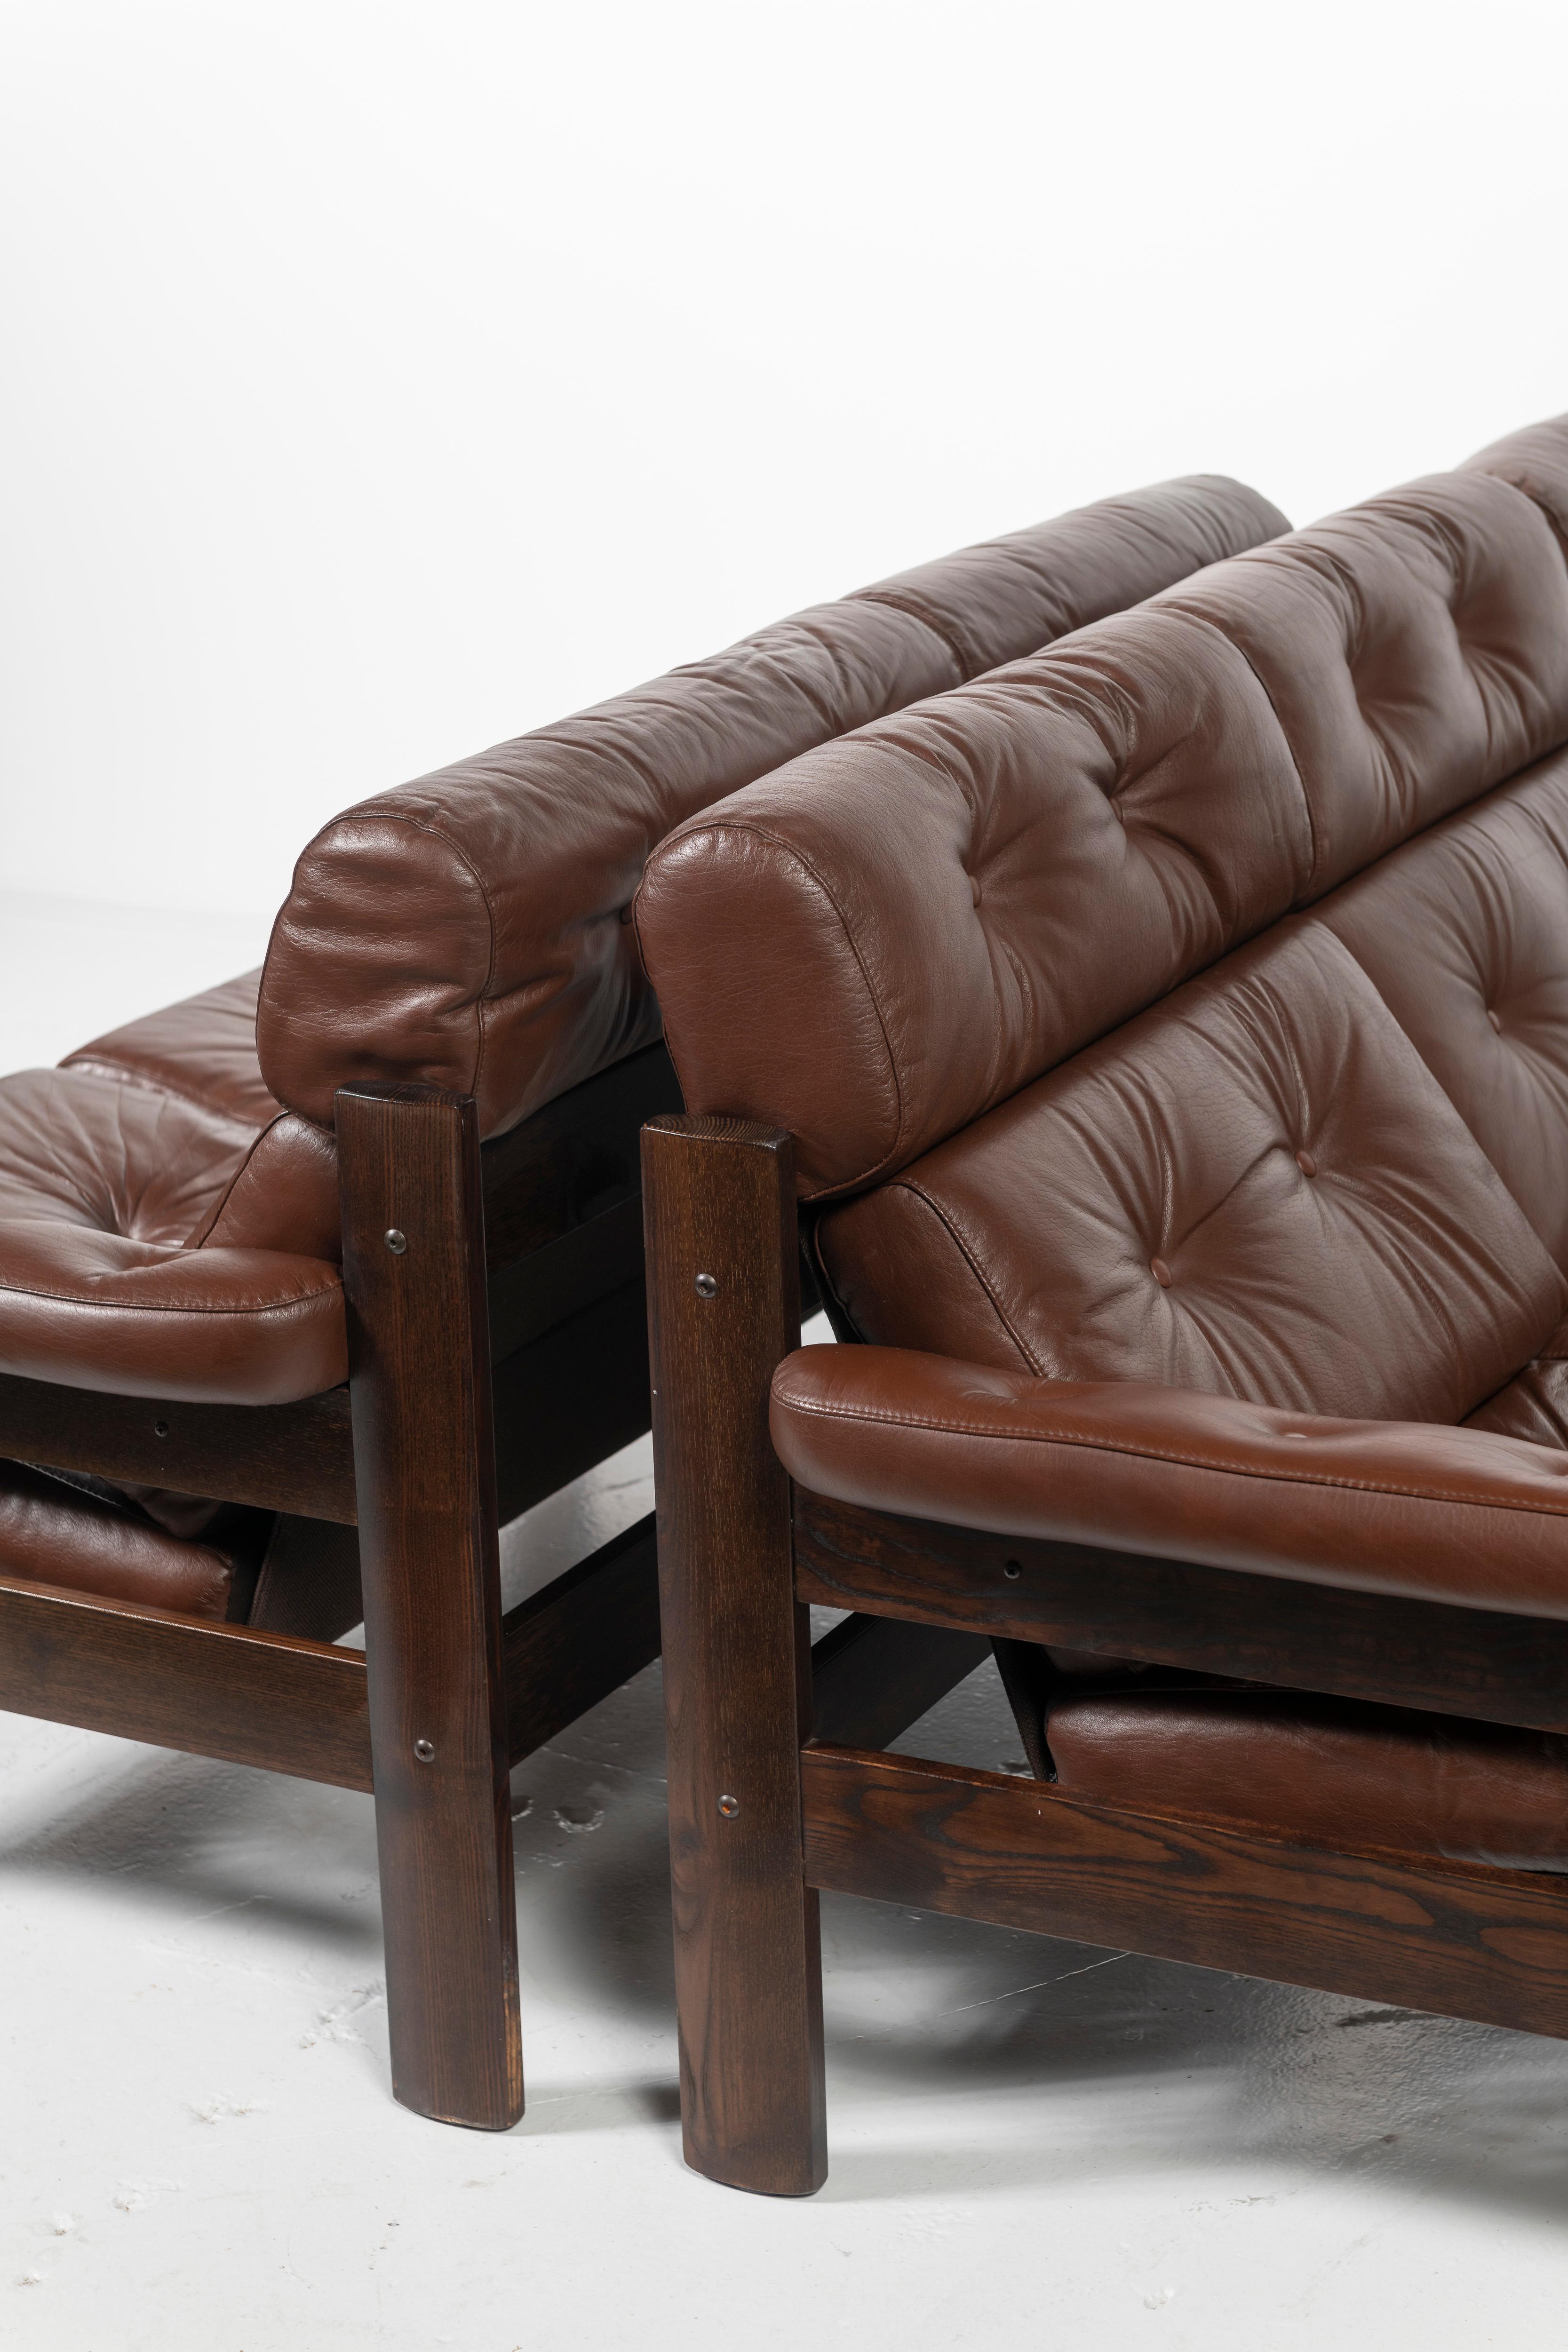 1970's Three Seat Tufted Sofa and Loveseat Set in Leather and Rosewood, Norway In Good Condition For Sale In San Francisco, CA